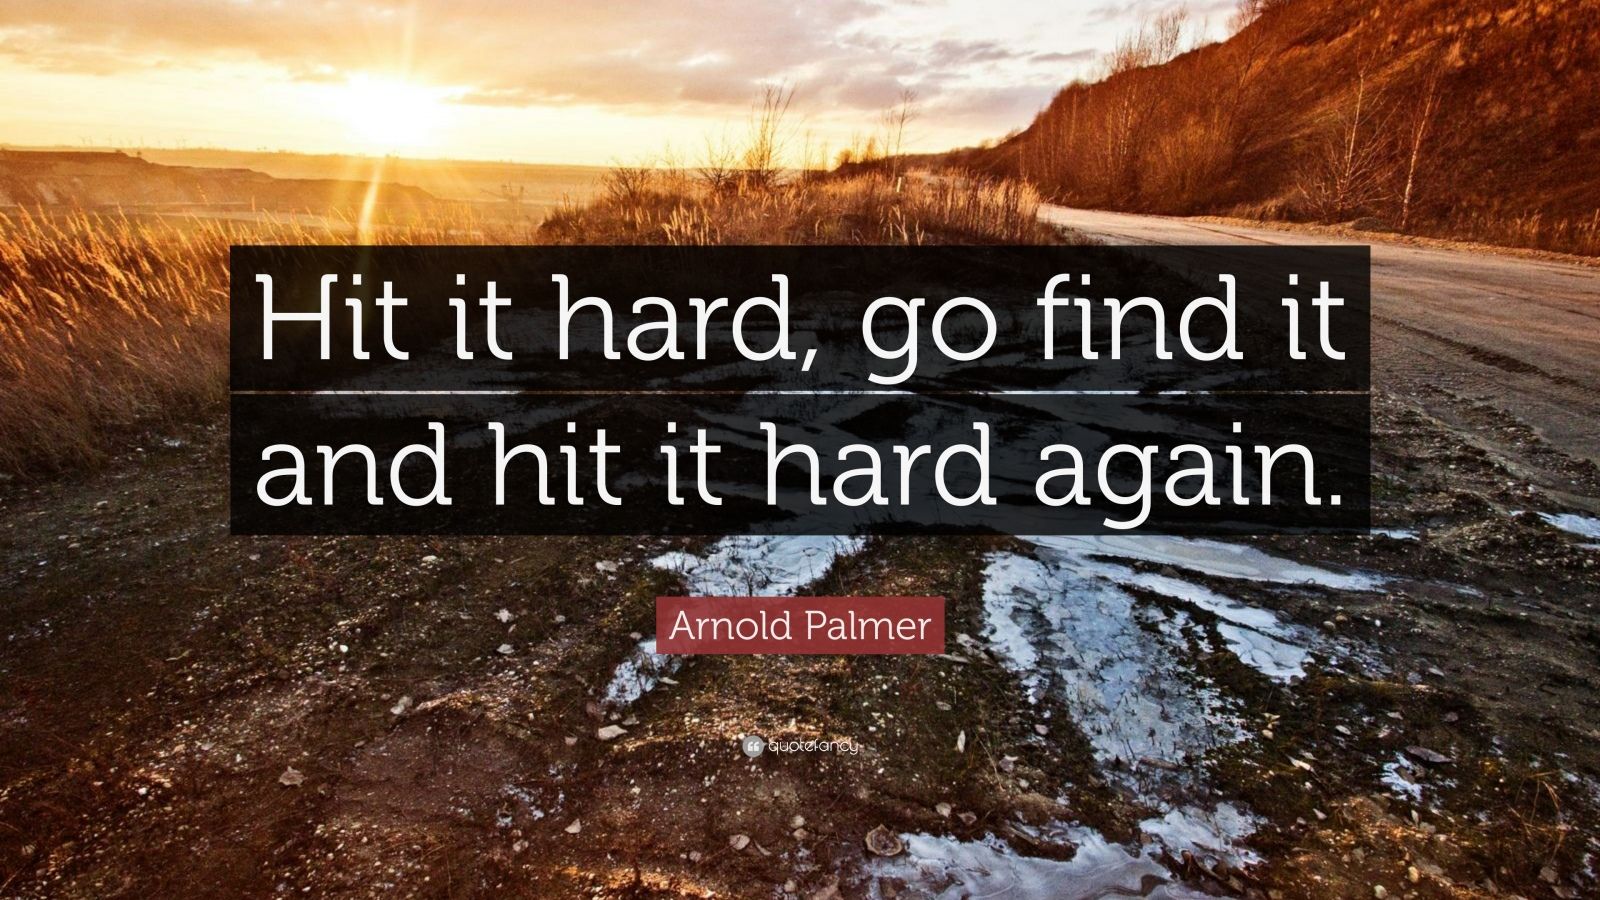 Arnold Palmer Quote “Hit it hard, go find it and hit it hard again